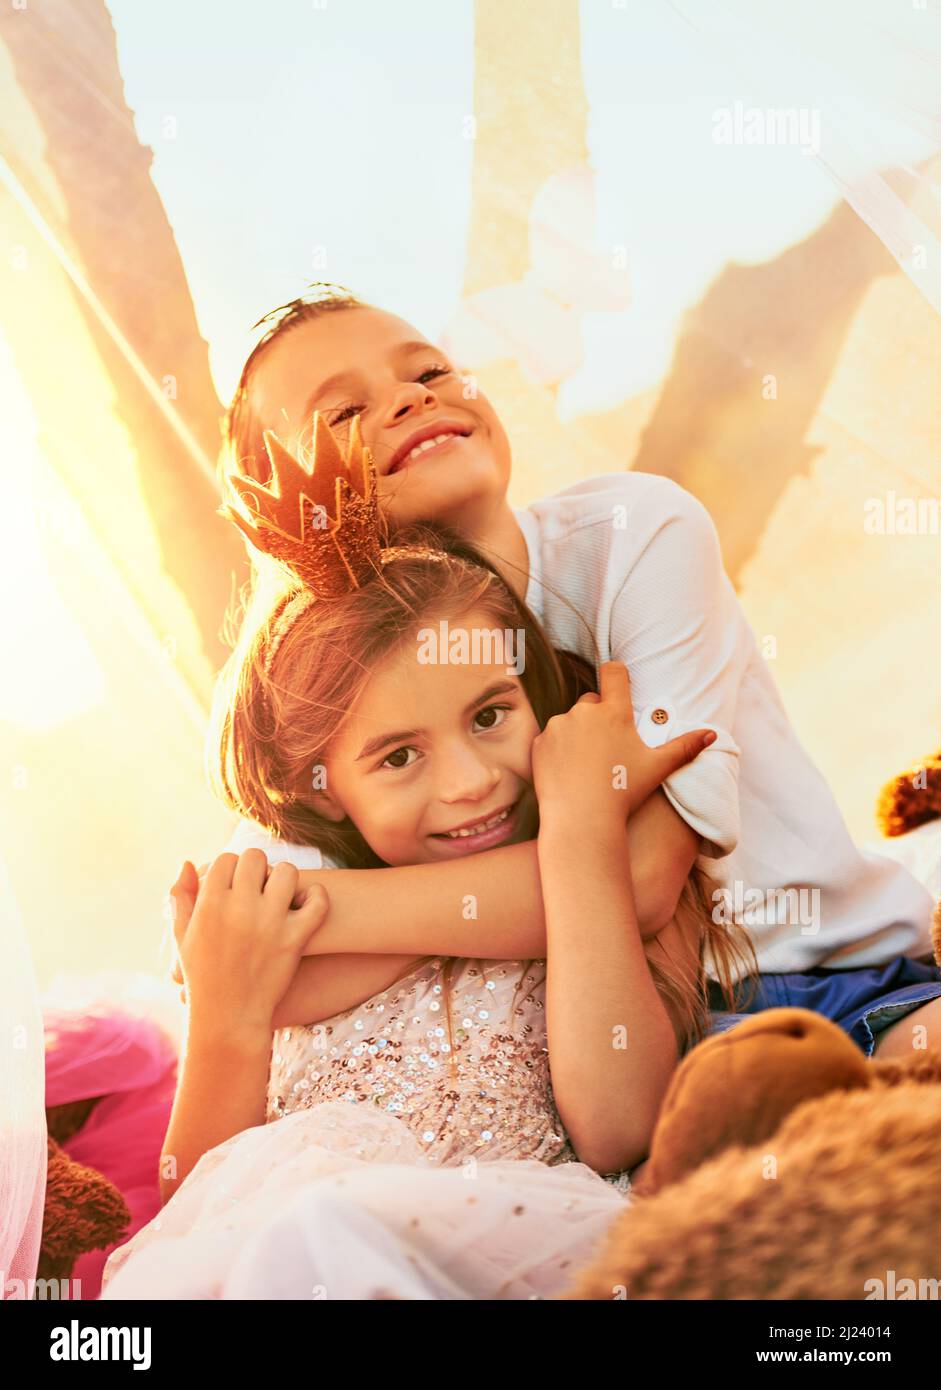 Siblings by chance, friends by choice. Shot of an adorable little brother and sister playing outdoors. Stock Photo